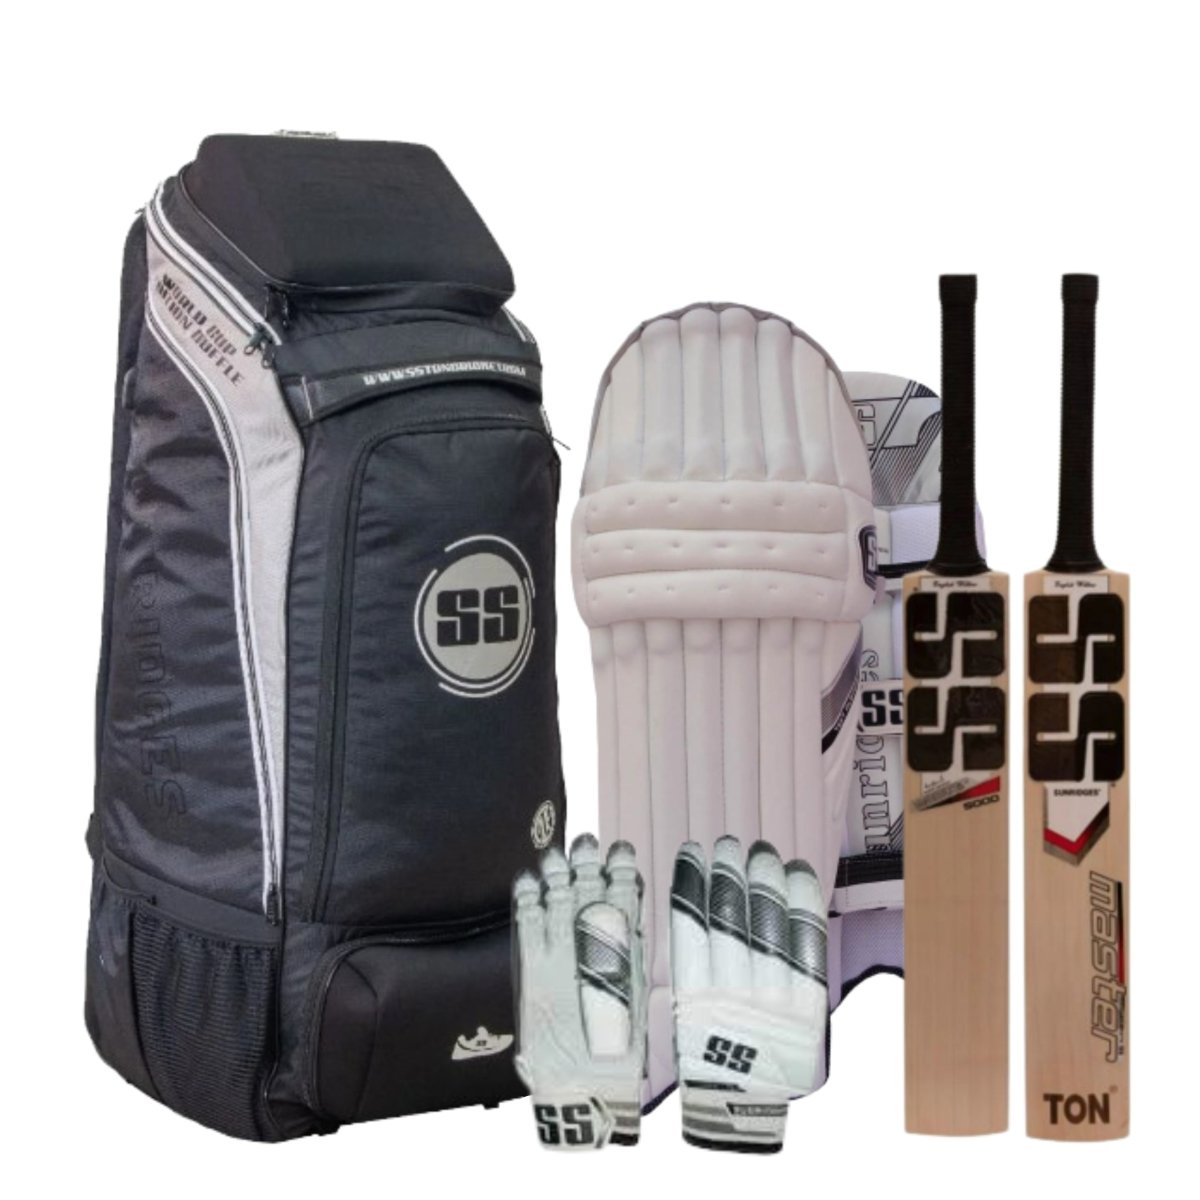 SS Master 5000 English Willow Cricket Bat + SS Test Players Batting Pads + SS Test Players Batting Gloves + SS Worldcup Duffle - Acrux Sports